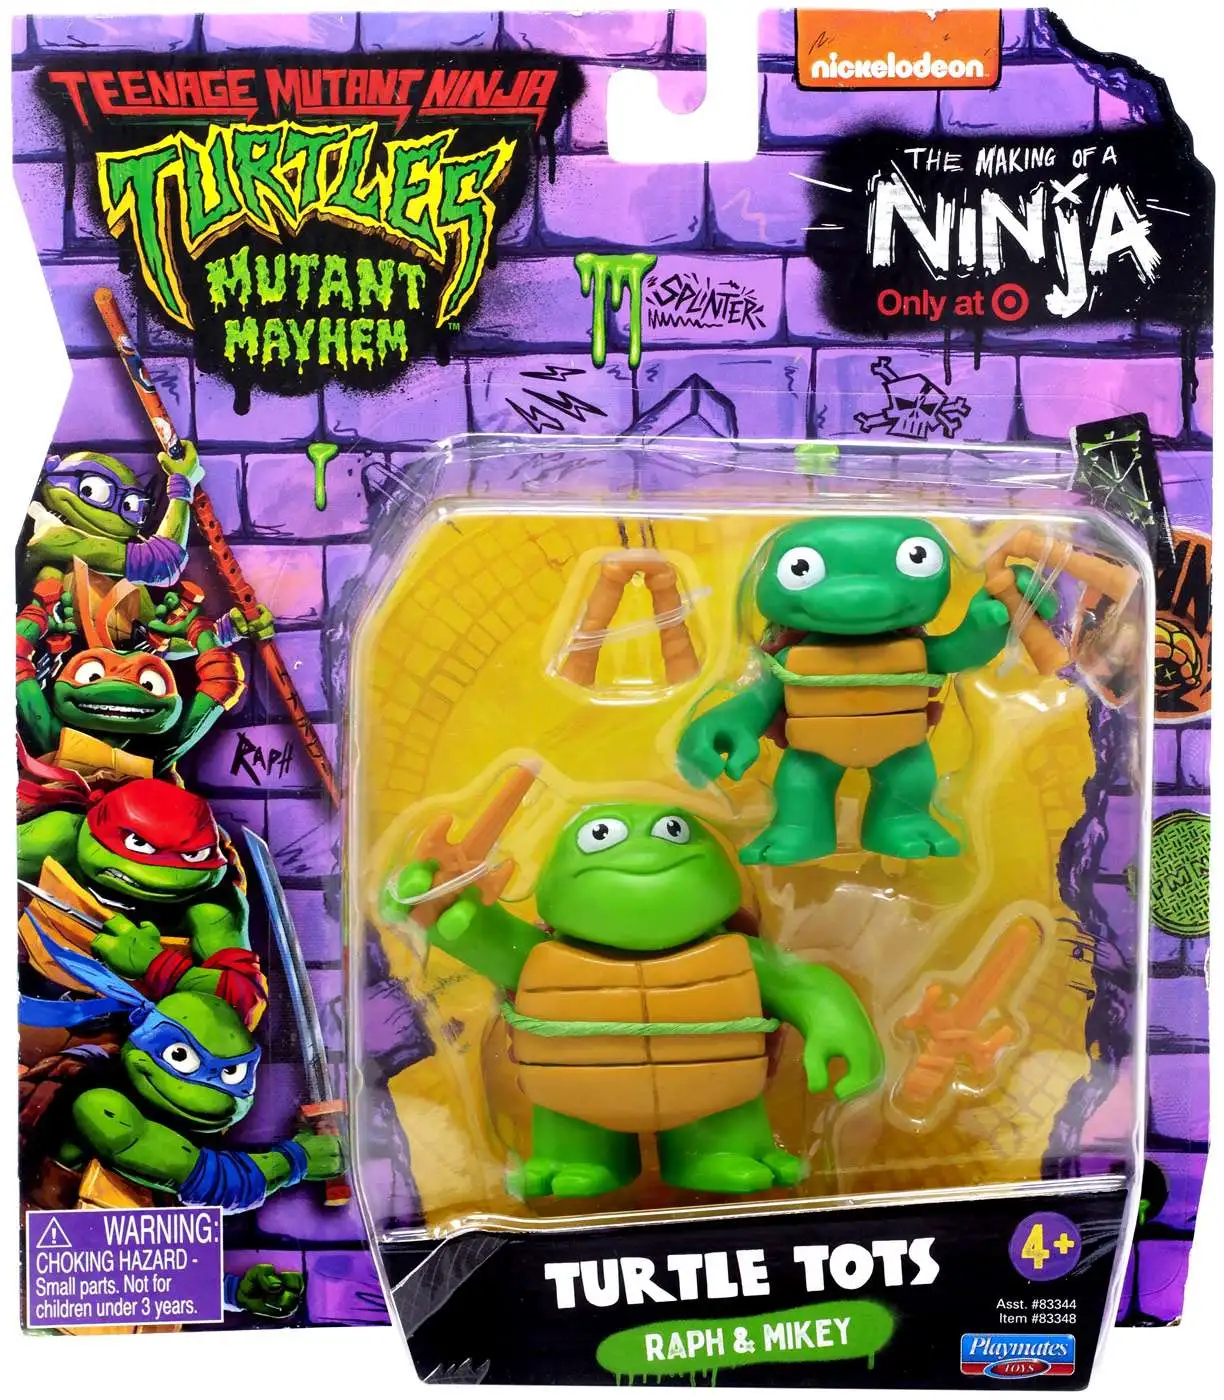 TMNT MUTANT MAYHEM CINEMA EXCLUSIVE COLLECTABLE COMIC BOOK. PERFECT  CONDITION!